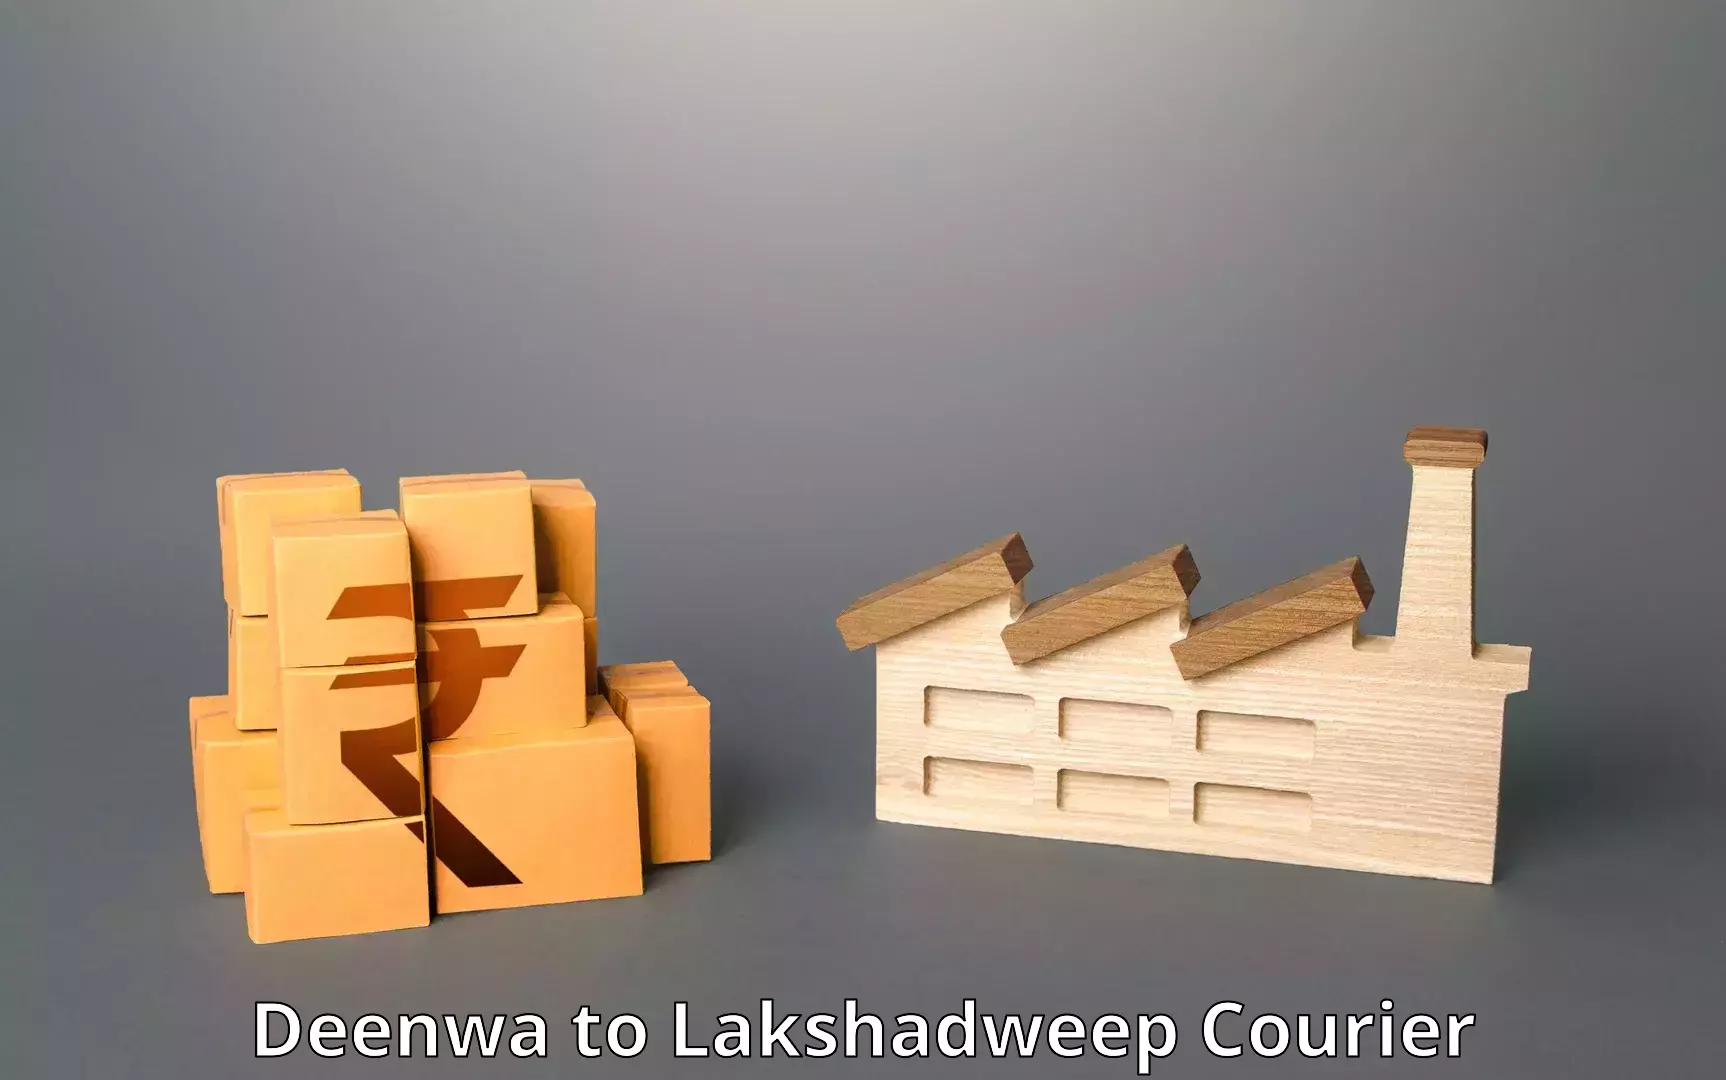 Global freight services Deenwa to Lakshadweep